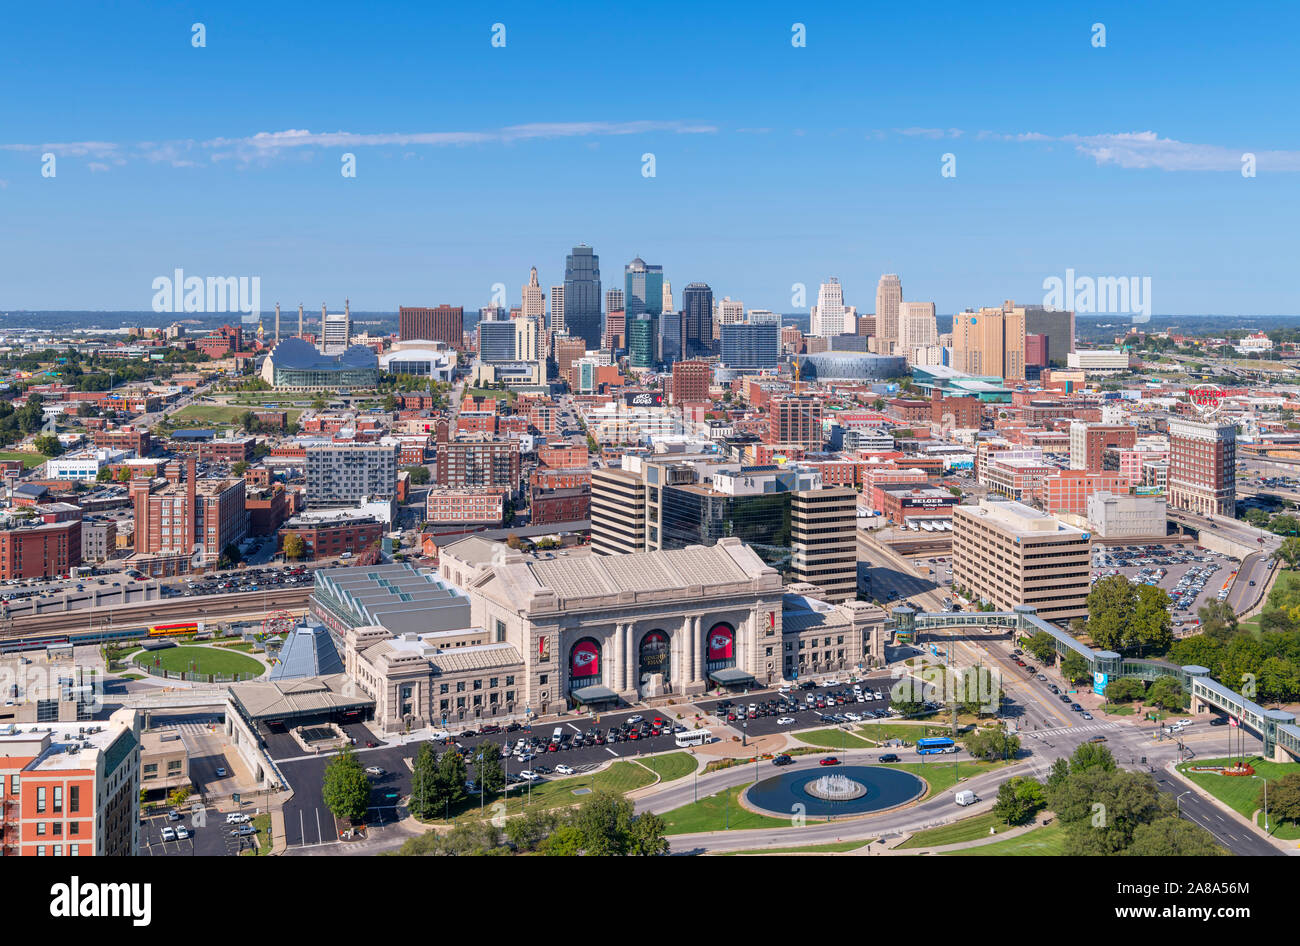 Kansas City skyline. Aerial view of downtown from the National World War I Memorial, Kansas City, Missouri, USA. Union Station is in the foreground. Stock Photo